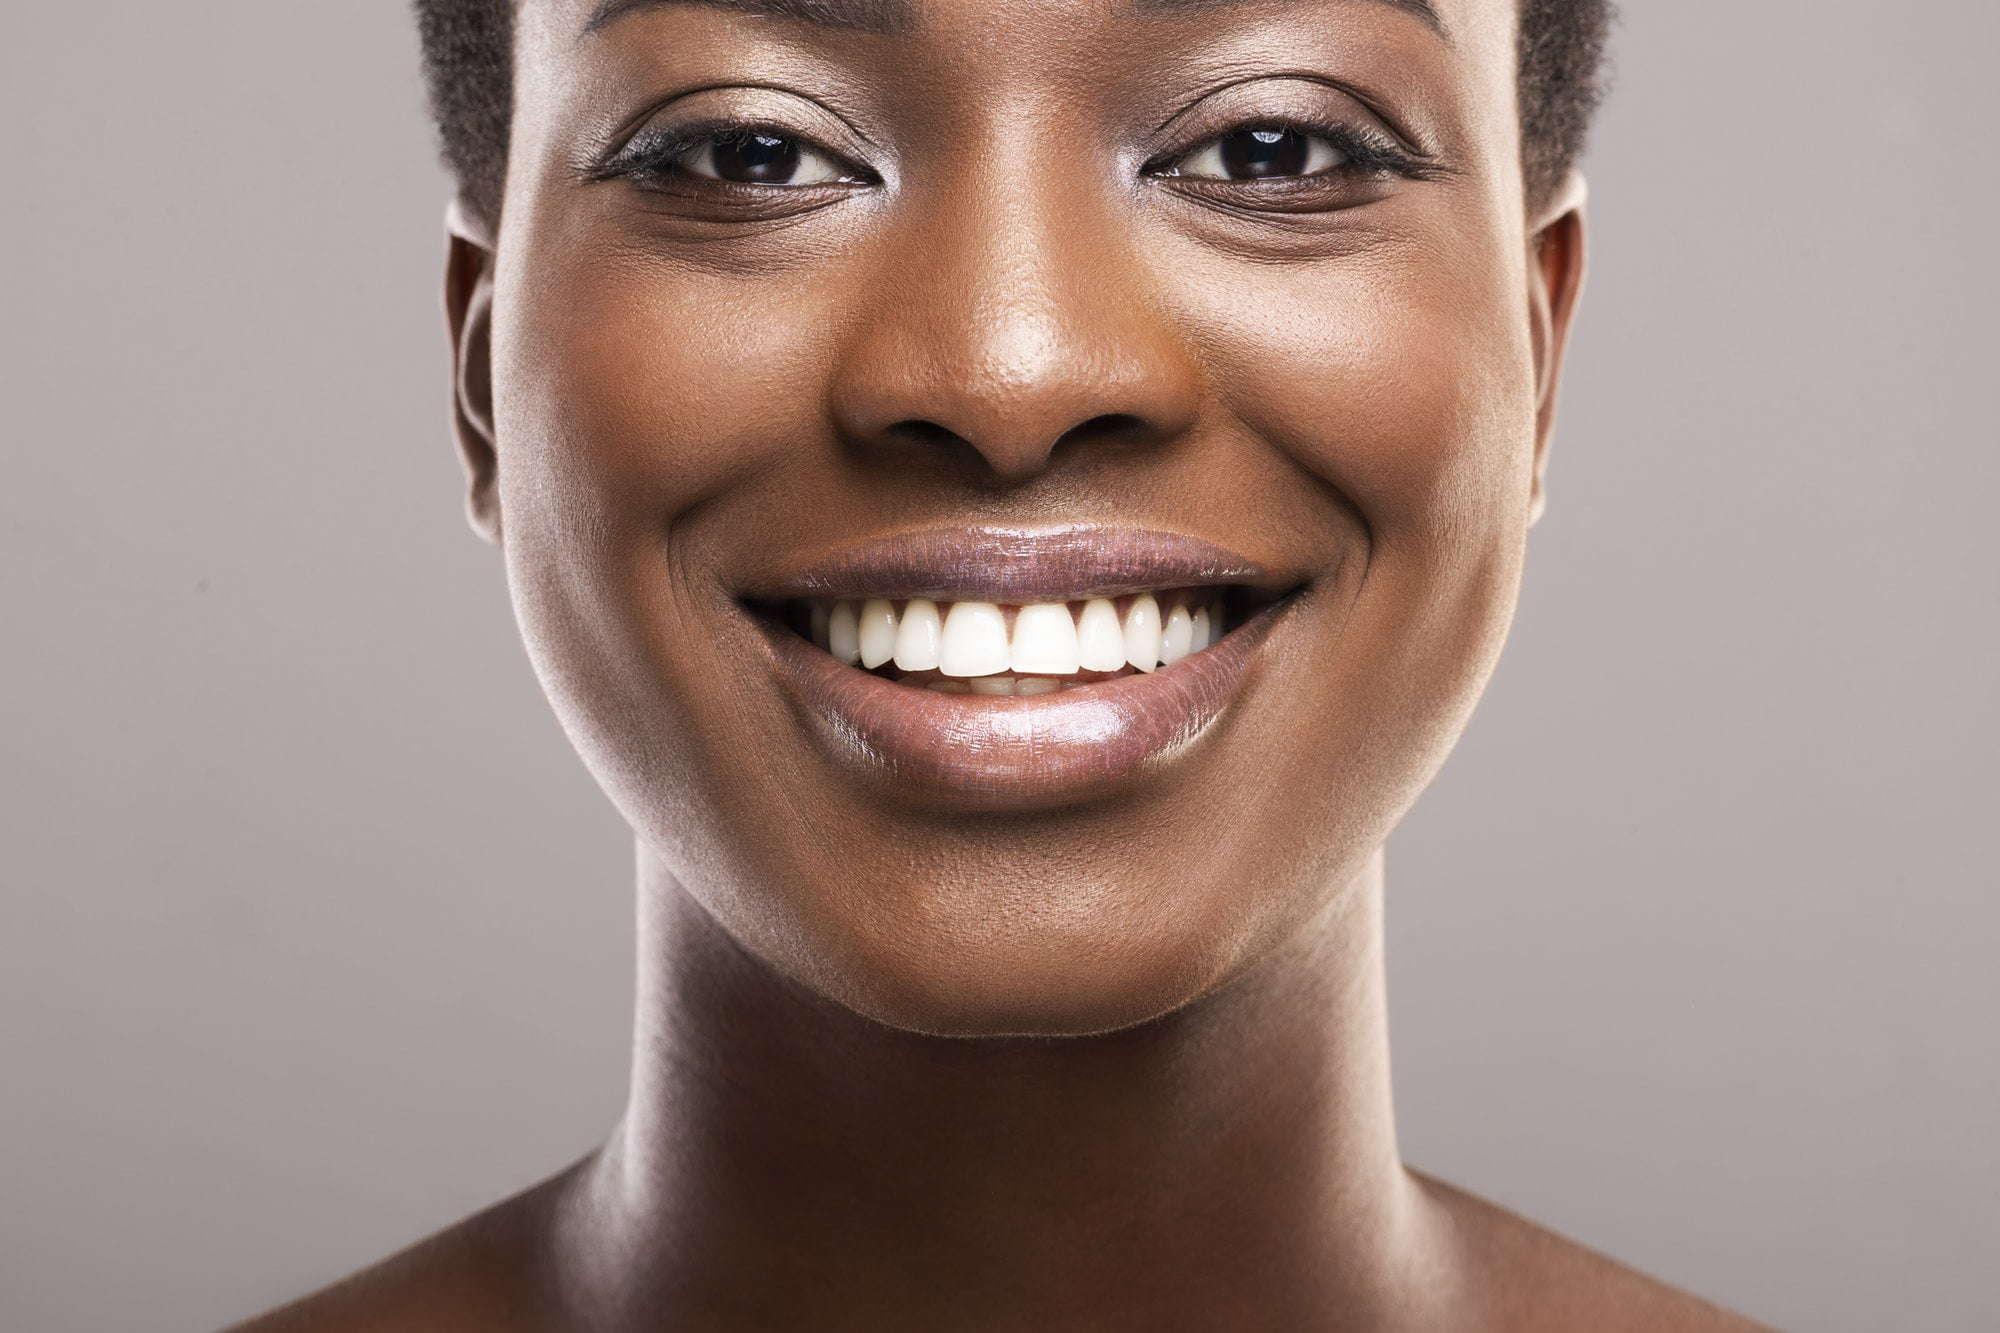 How to have perfect white teeth